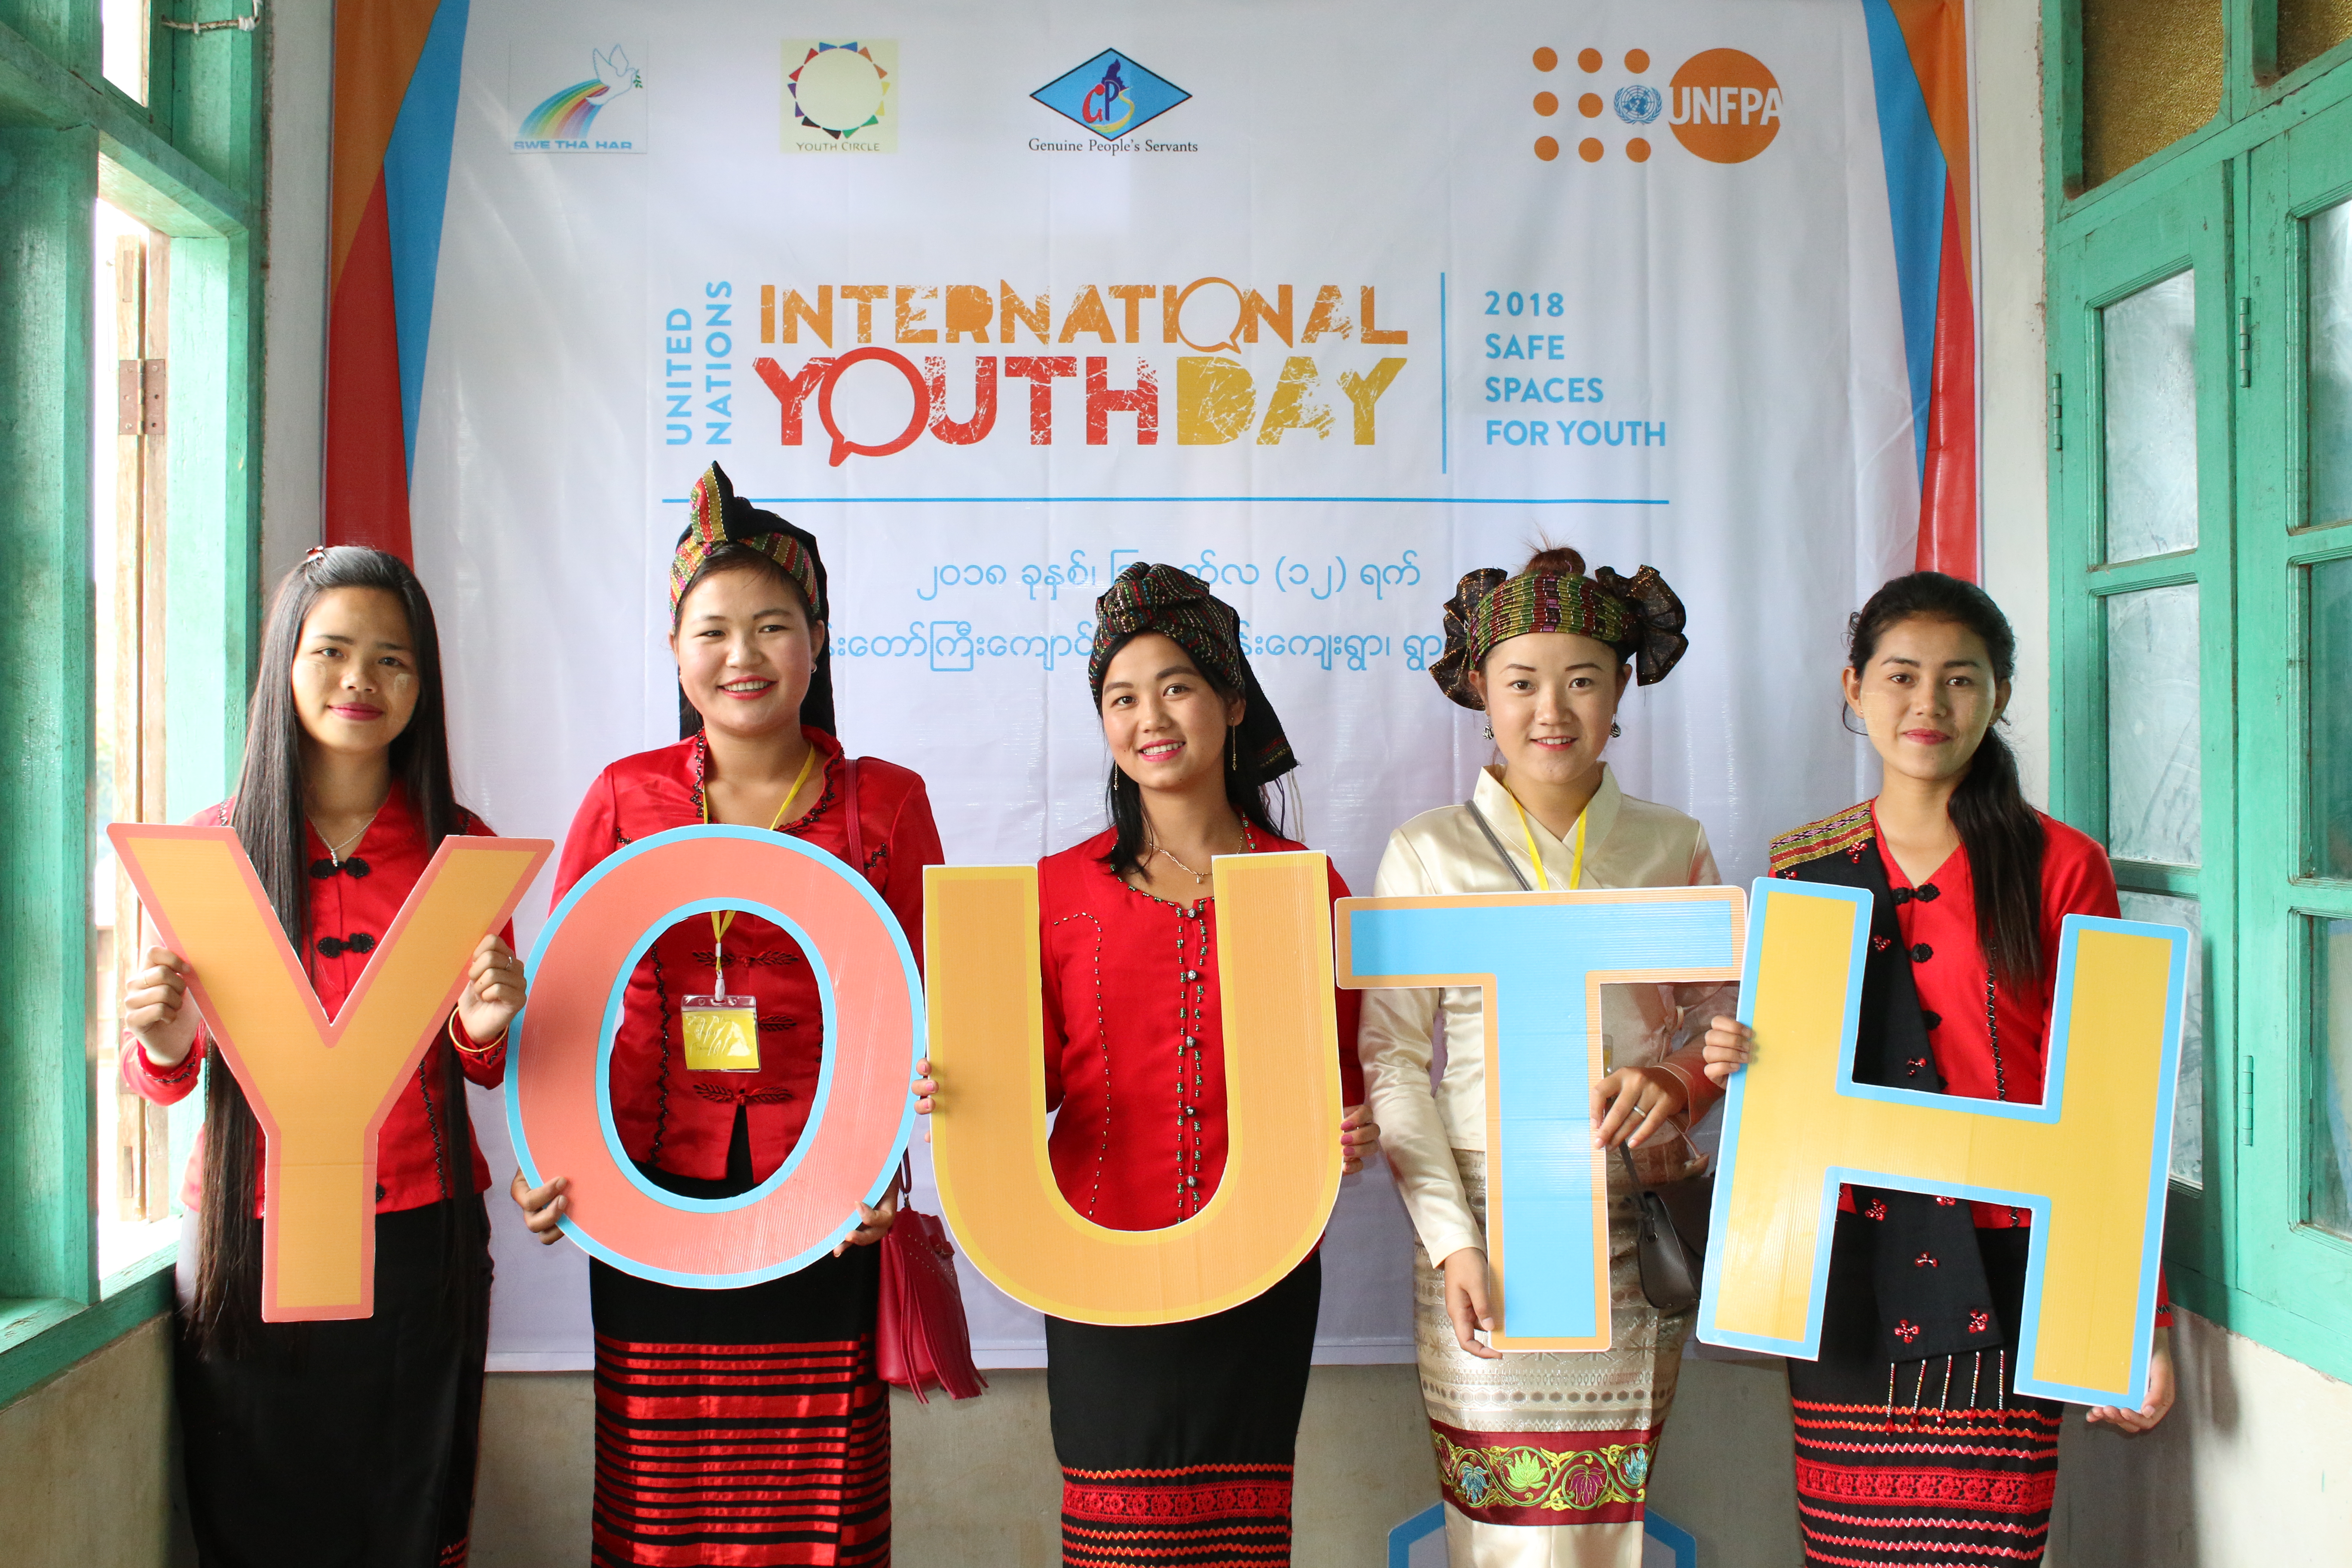 UNFPA Asiapacific | Adolescents & youth